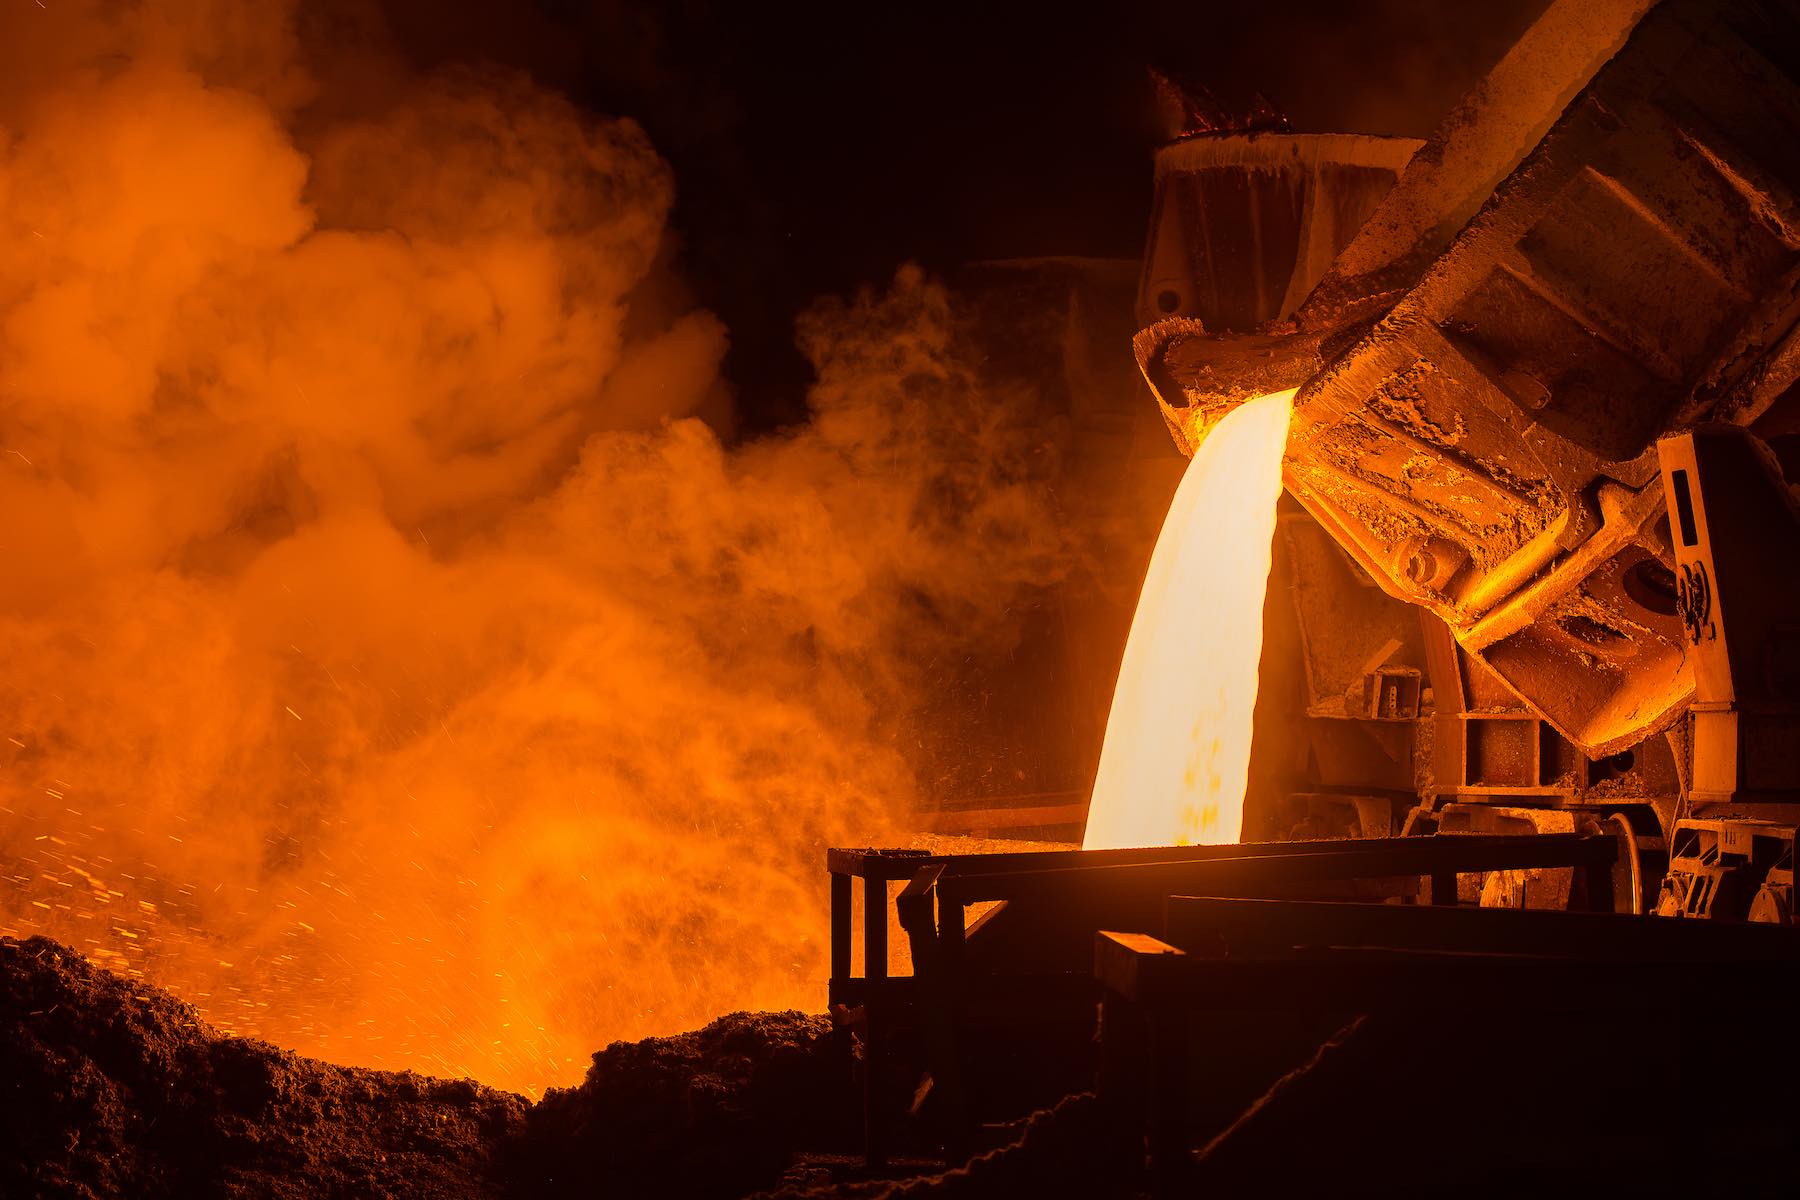 The trillion-dollar quest to make green steel